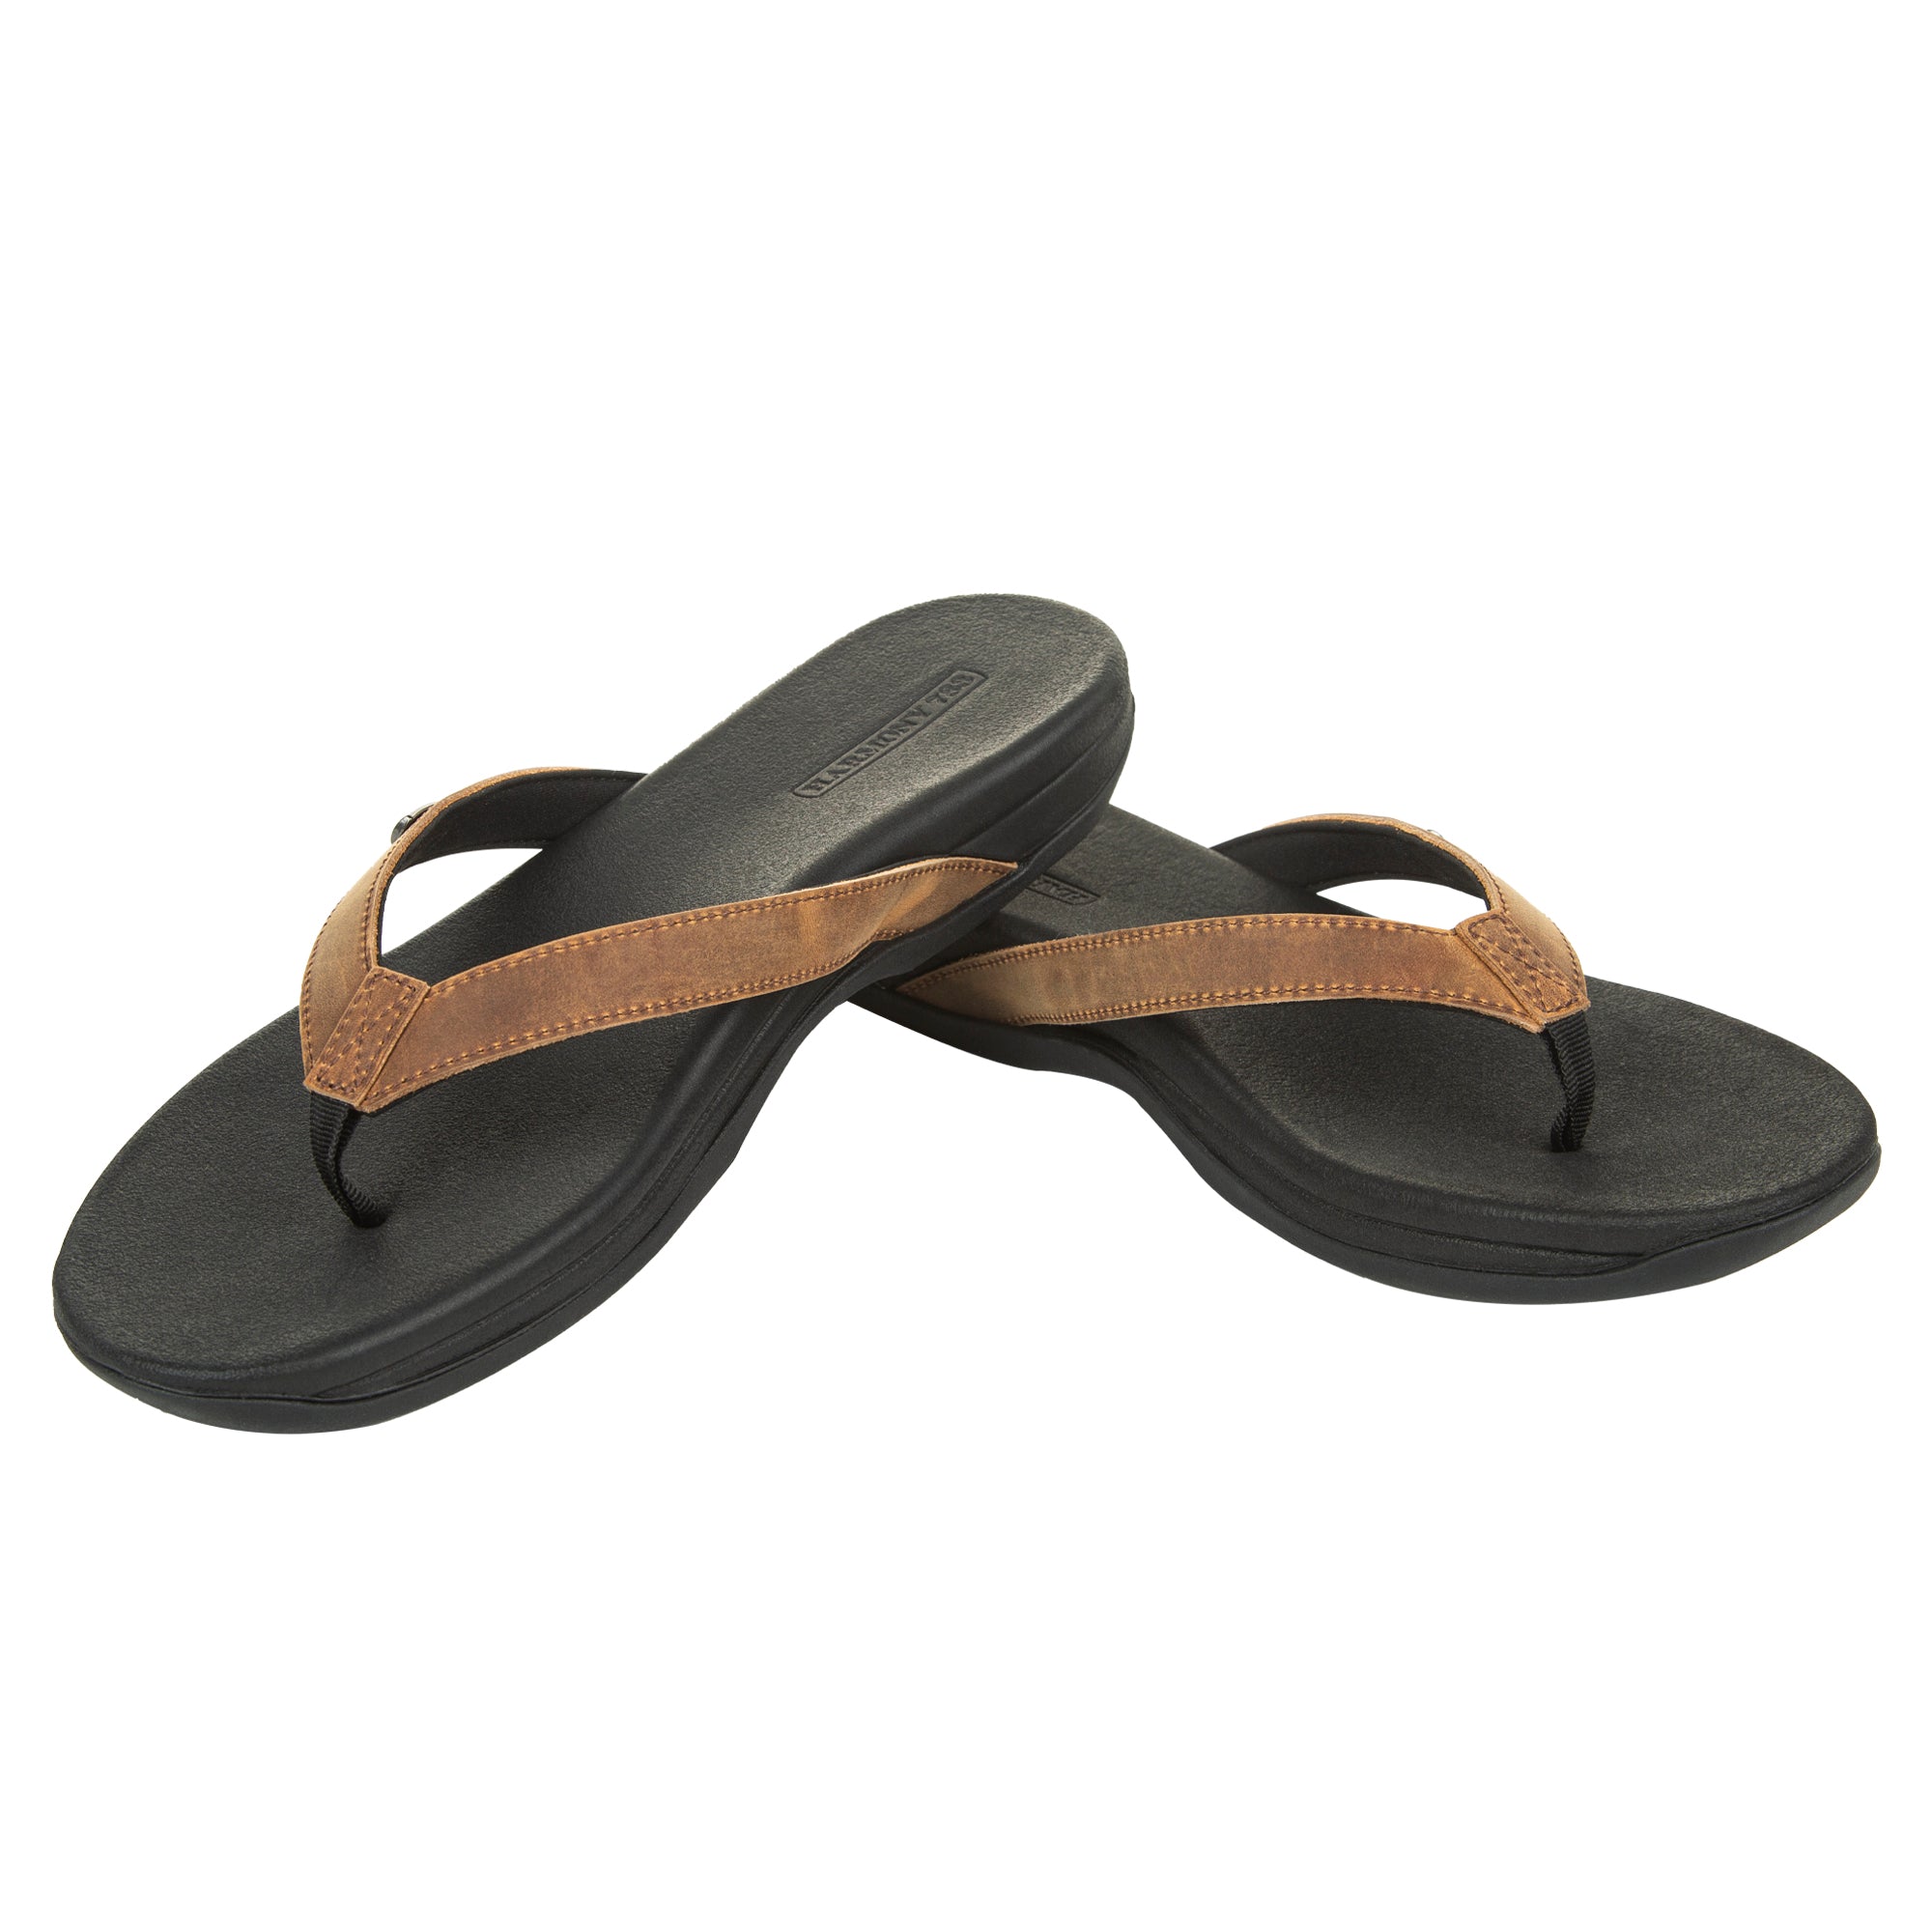 Lily Sandal • Brown Leather